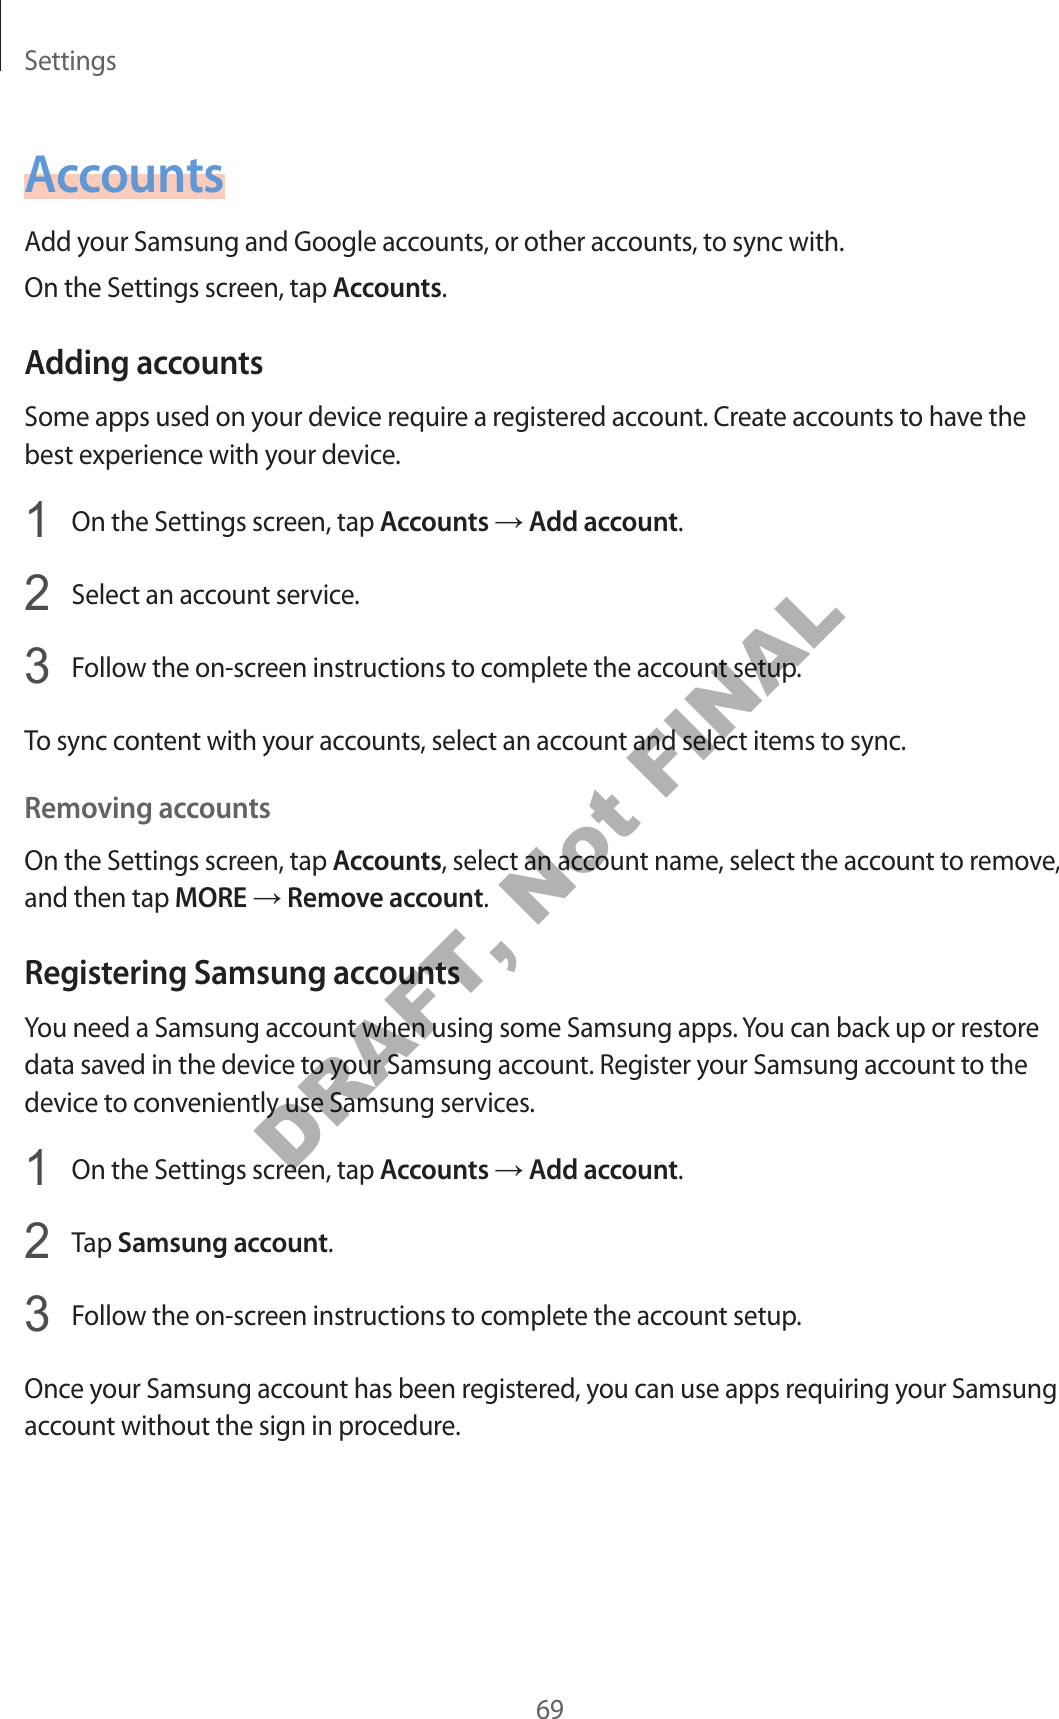 Settings69AccountsAdd your Samsung and Google accounts, or other accounts, to sync with.On the Settings screen, tap Accounts.Adding accountsSome apps used on your device require a registered account. Create accounts to have the best experience with your device.1  On the Settings screen, tap Accounts → Add account.2  Select an account service.3  Follow the on-screen instructions to complete the account setup.To sync content with your accounts, select an account and select items to sync.Removing accountsOn the Settings screen, tap Accounts, select an account name, select the account to remove, and then tap MORE → Remove account.Registering Samsung accountsYou need a Samsung account when using some Samsung apps. You can back up or restore data saved in the device to your Samsung account. Register your Samsung account to the device to conveniently use Samsung services.1  On the Settings screen, tap Accounts → Add account.2  Tap Samsung account.3  Follow the on-screen instructions to complete the account setup.Once your Samsung account has been registered, you can use apps requiring your Samsung account without the sign in procedure.DRAFT, Not FINAL